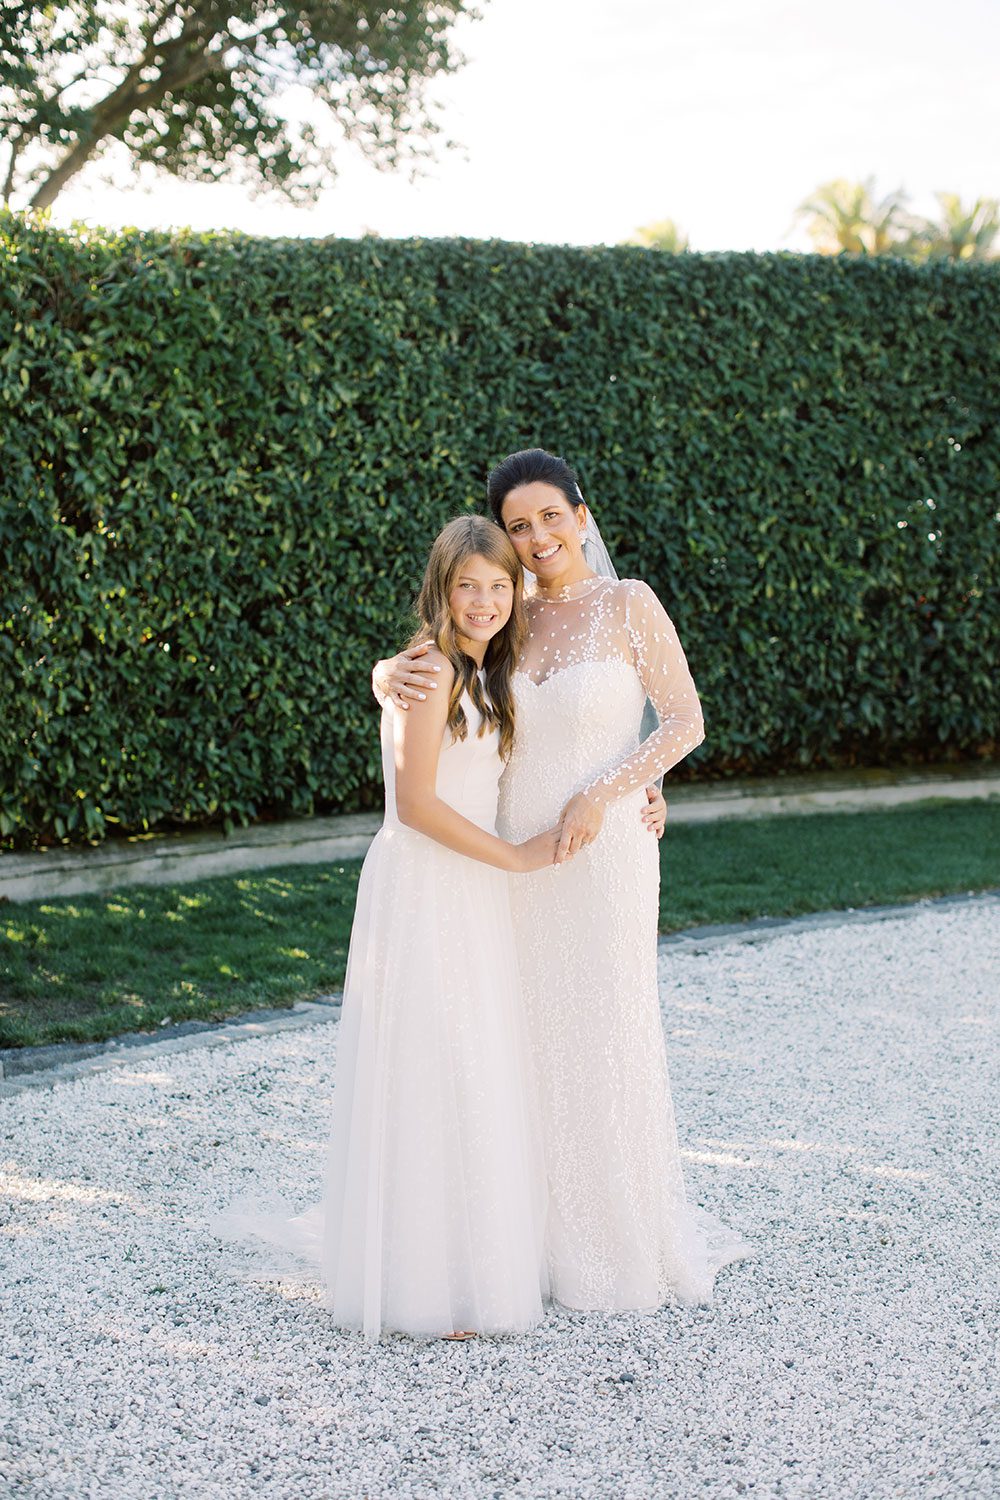 Bride wearing bespoke gown by Auckland wedding dress designer Vinka Design, with a high neckline and delicate spotted embroidery - with bridesmaid near hedge